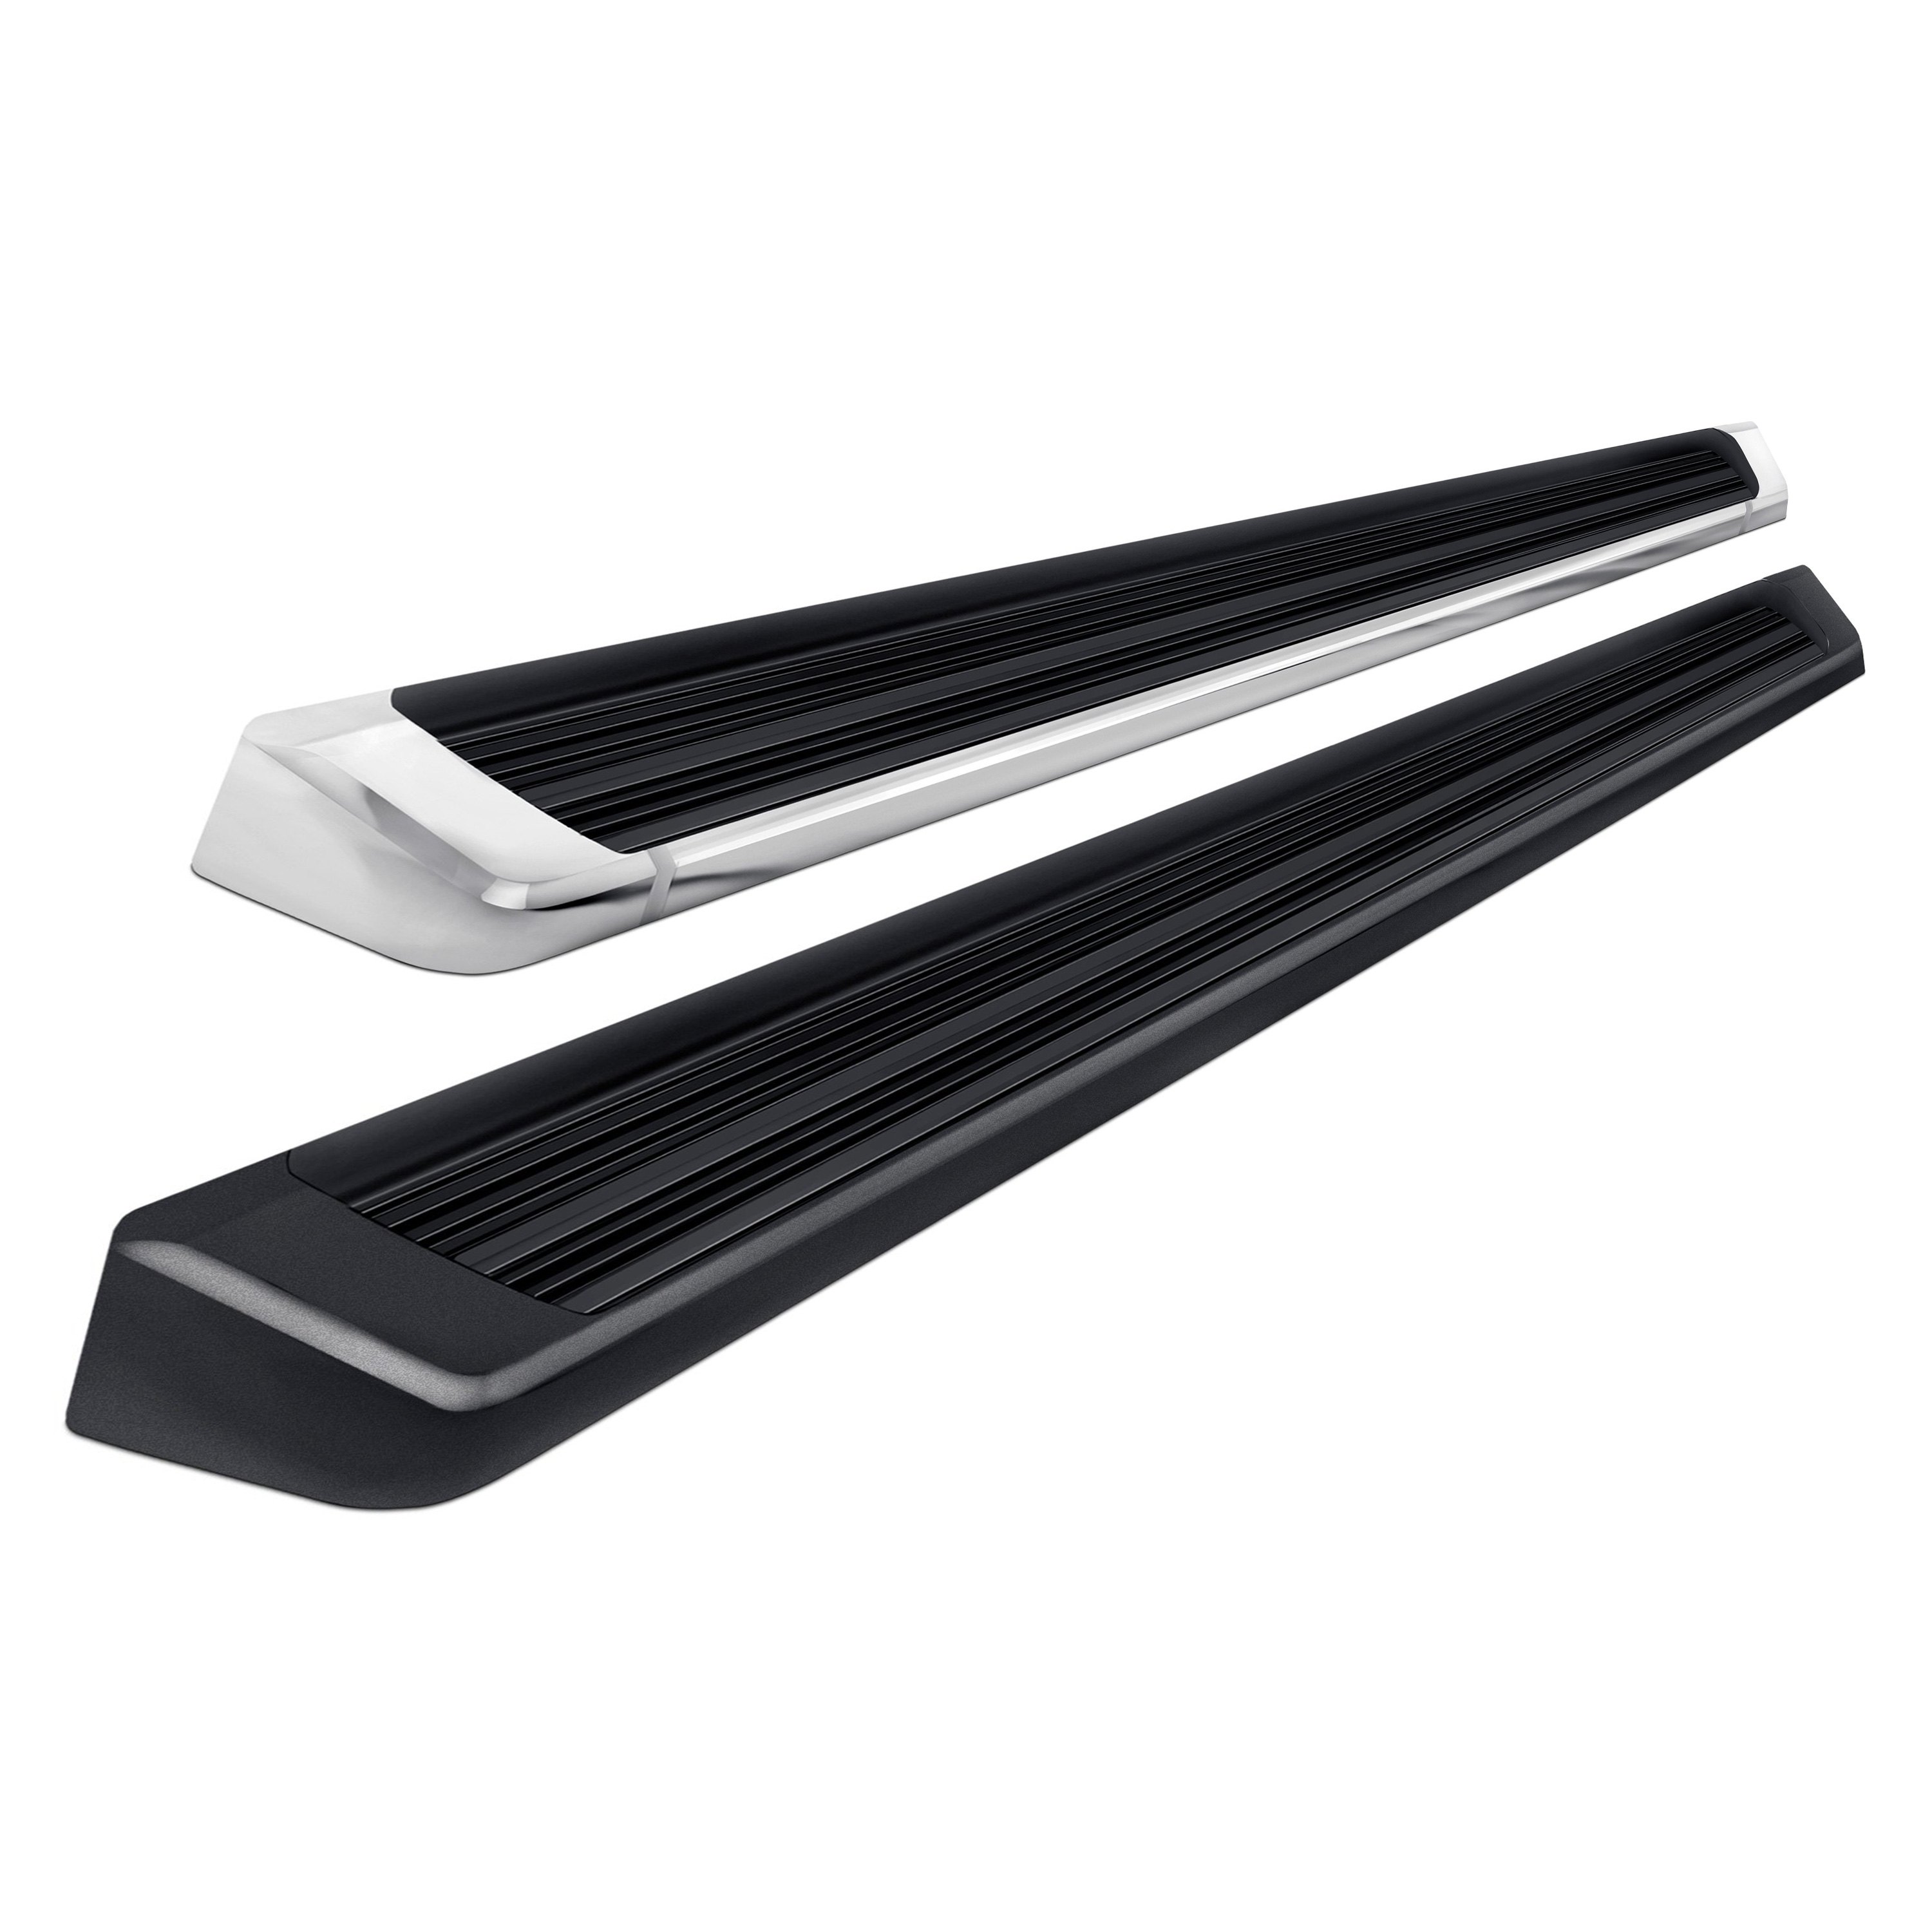 For Chevy Silverado 1500 LD 19 APG 6" S Series Cab Length Black Running Boards 